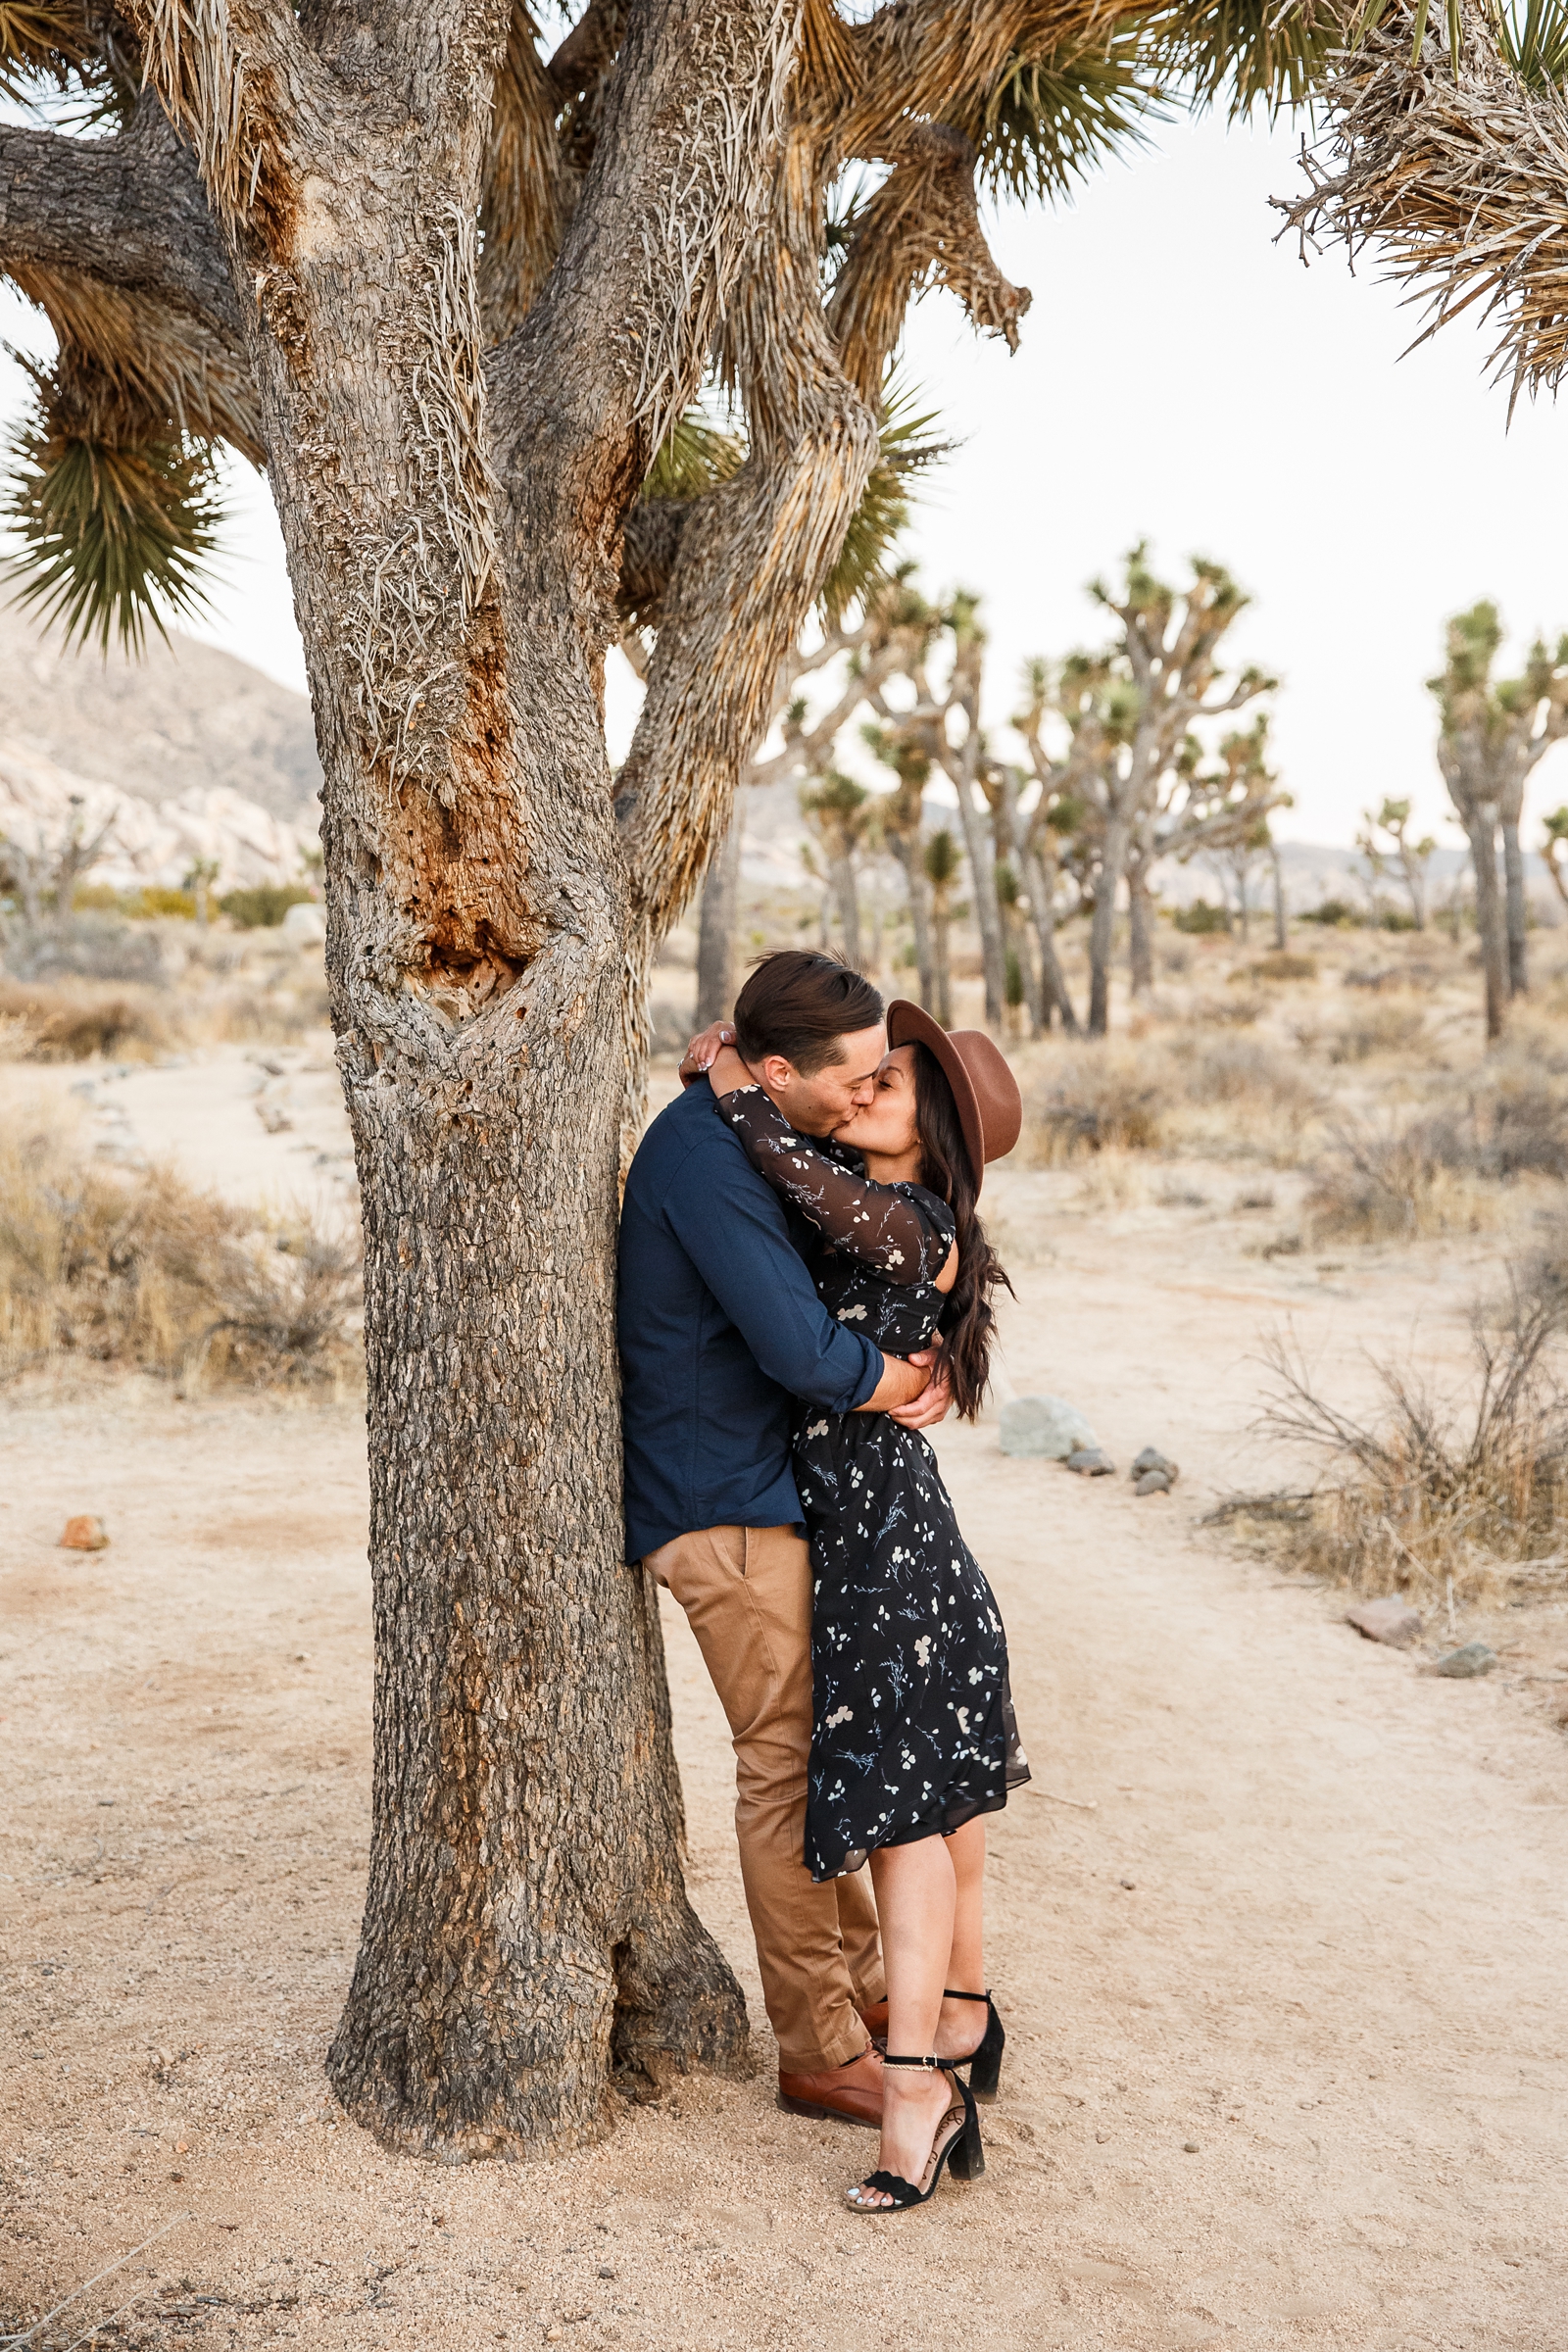 Swoon worthy kiss in Joshua Tree National Park.